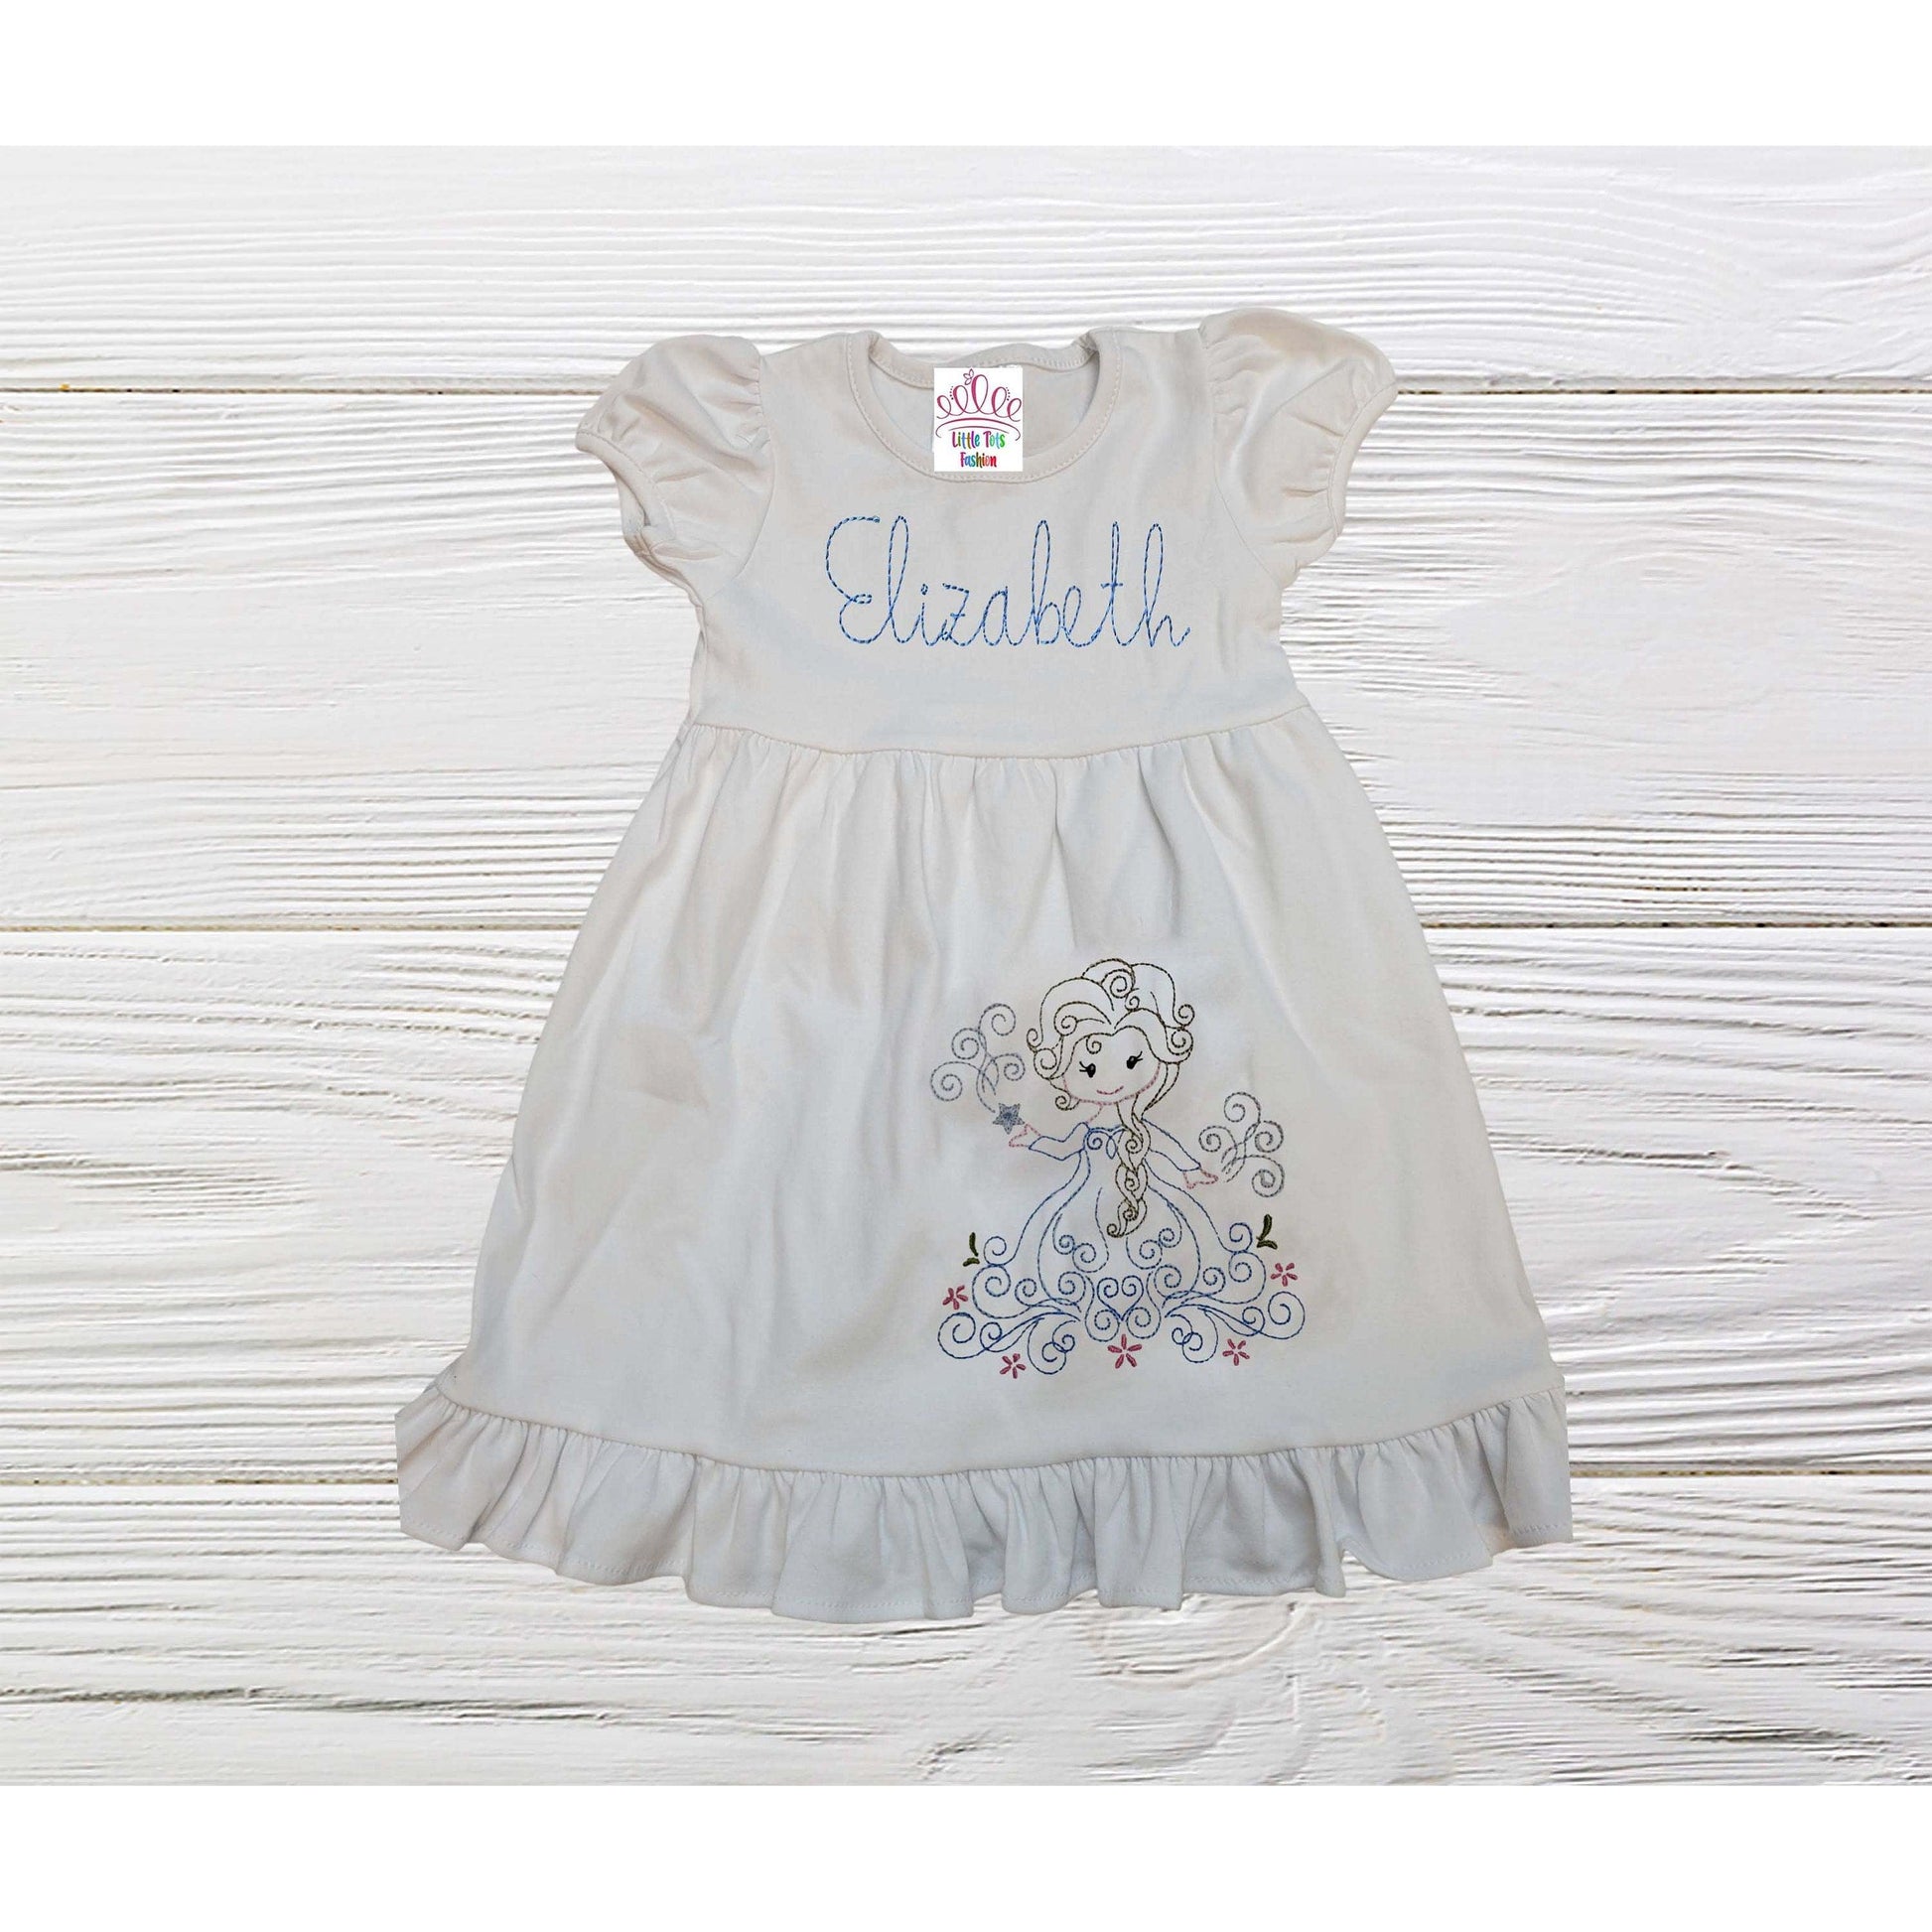 Full view of the white Elsa Frozen Dress with a princess design